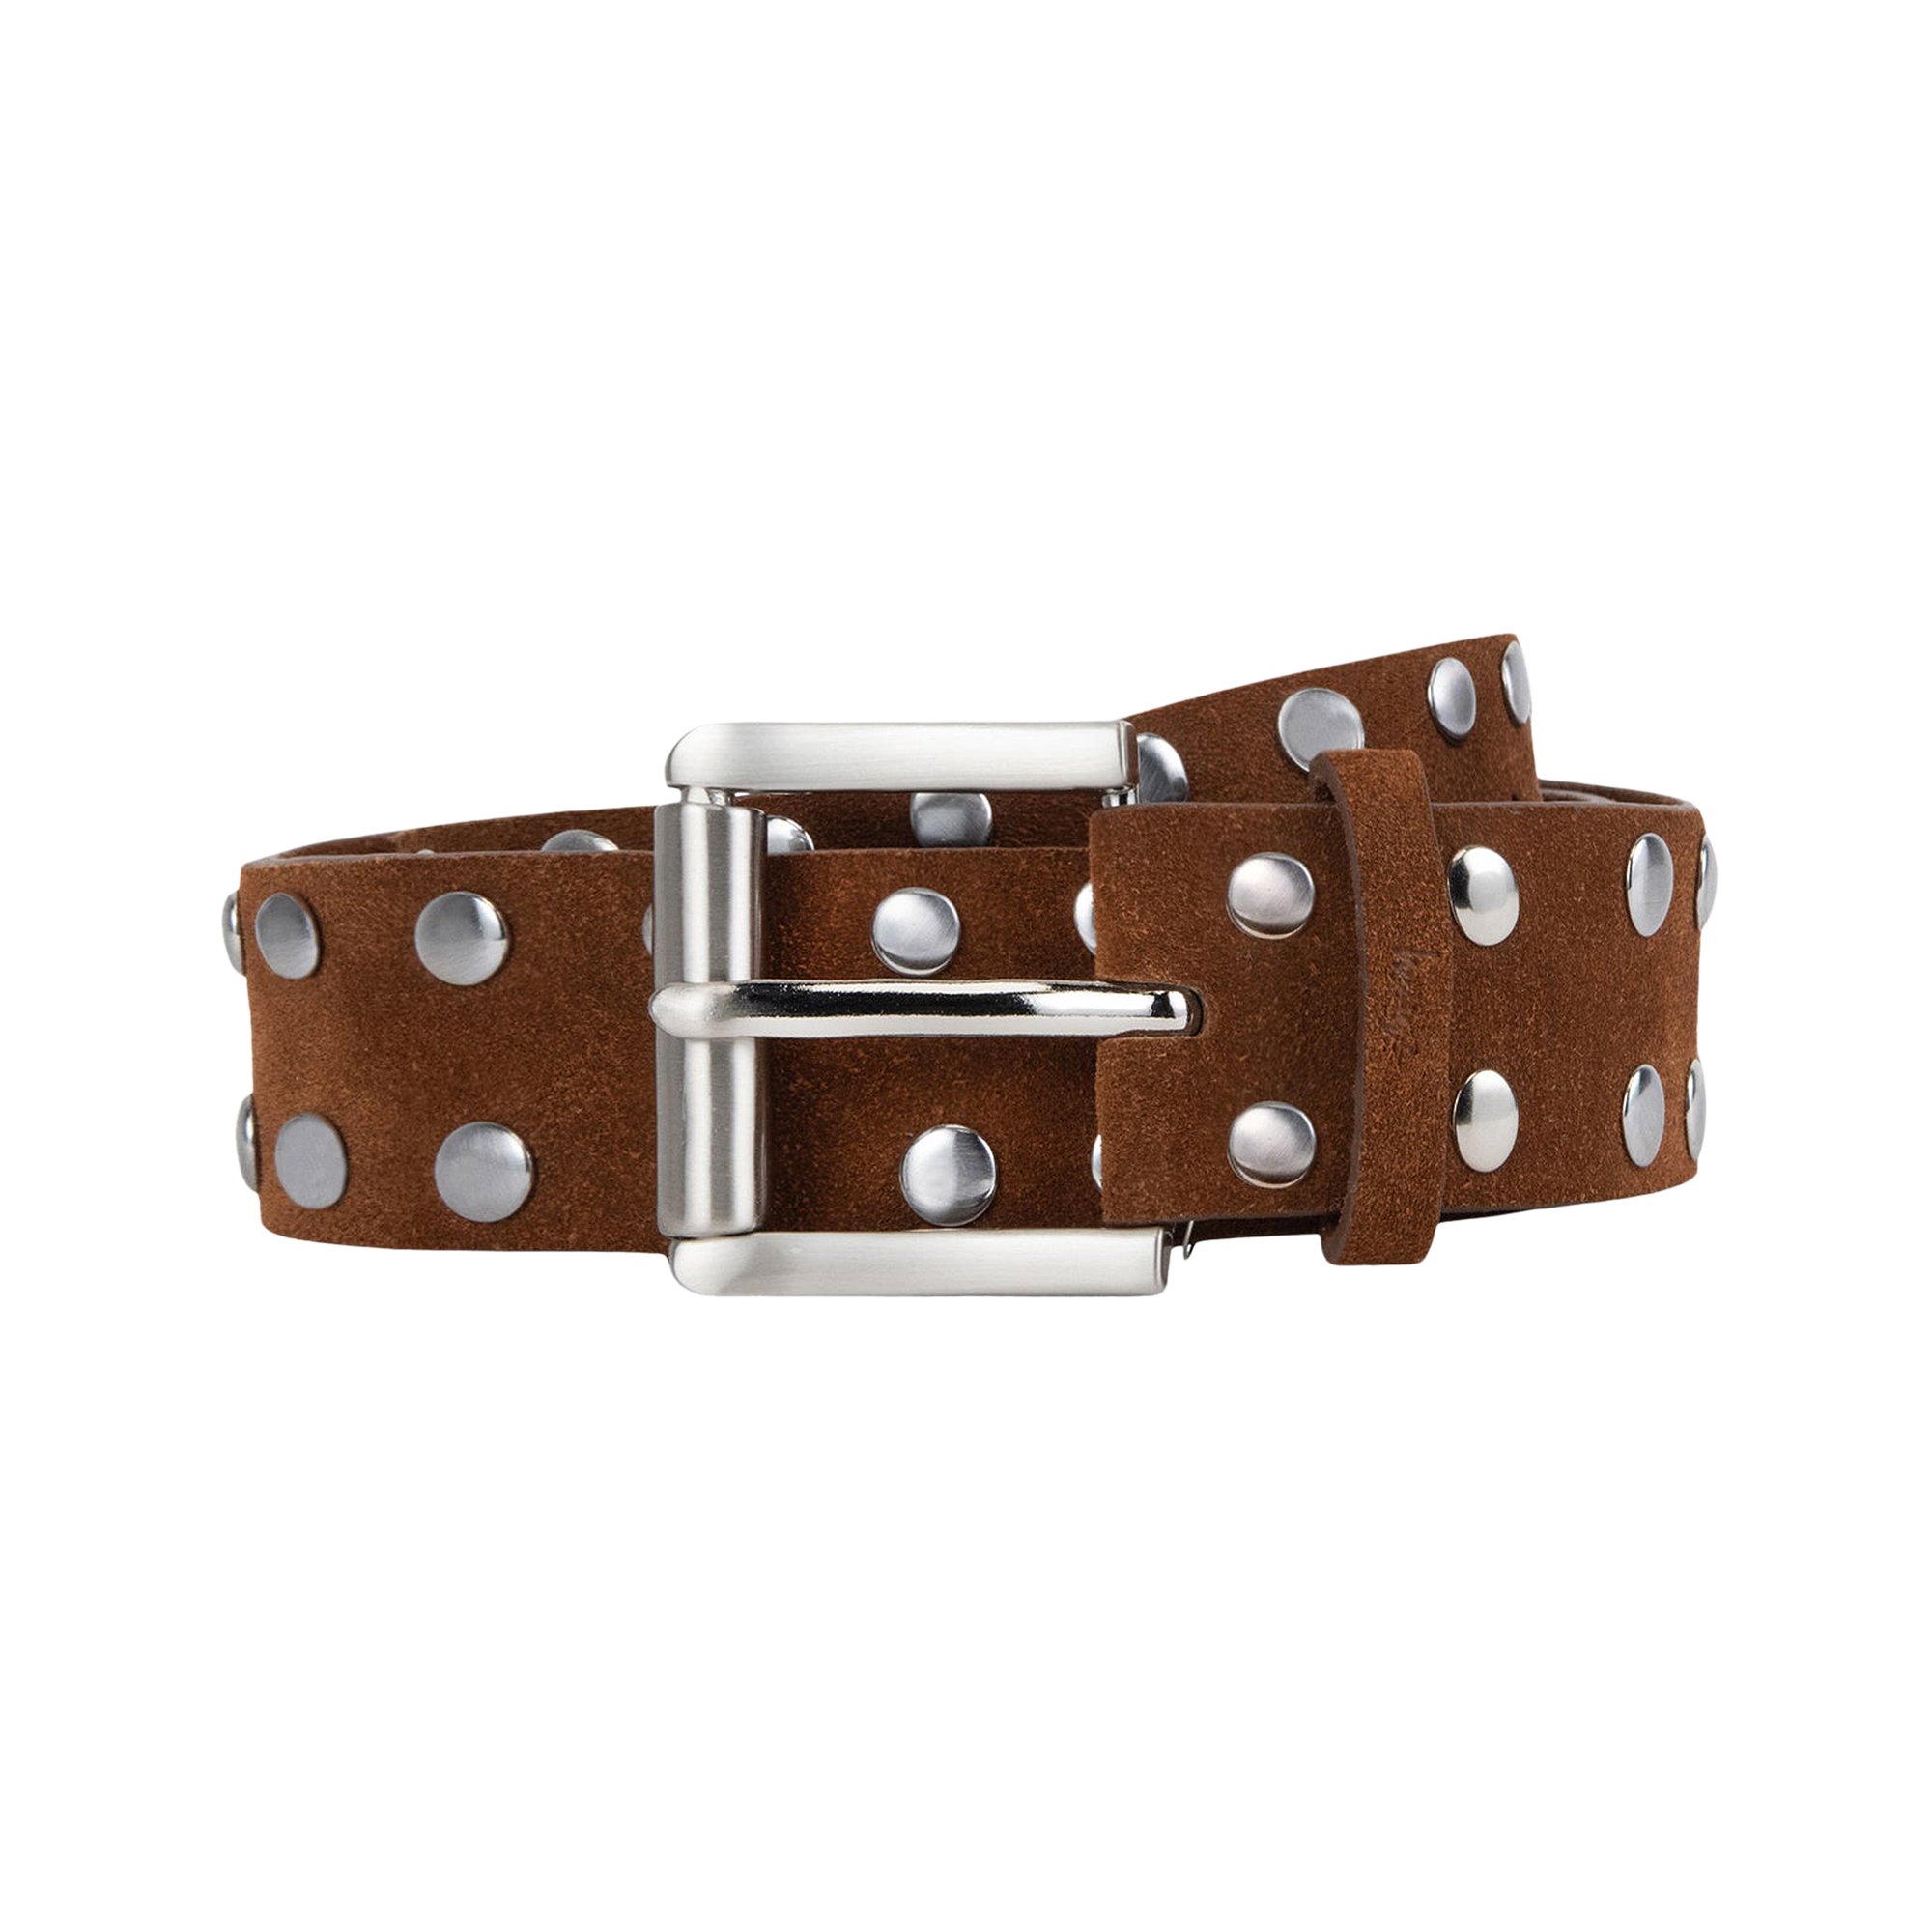 Buy Stussy 8 Ball Studded Belt 'Brown Suede' - 135184 BROW | GOAT CA